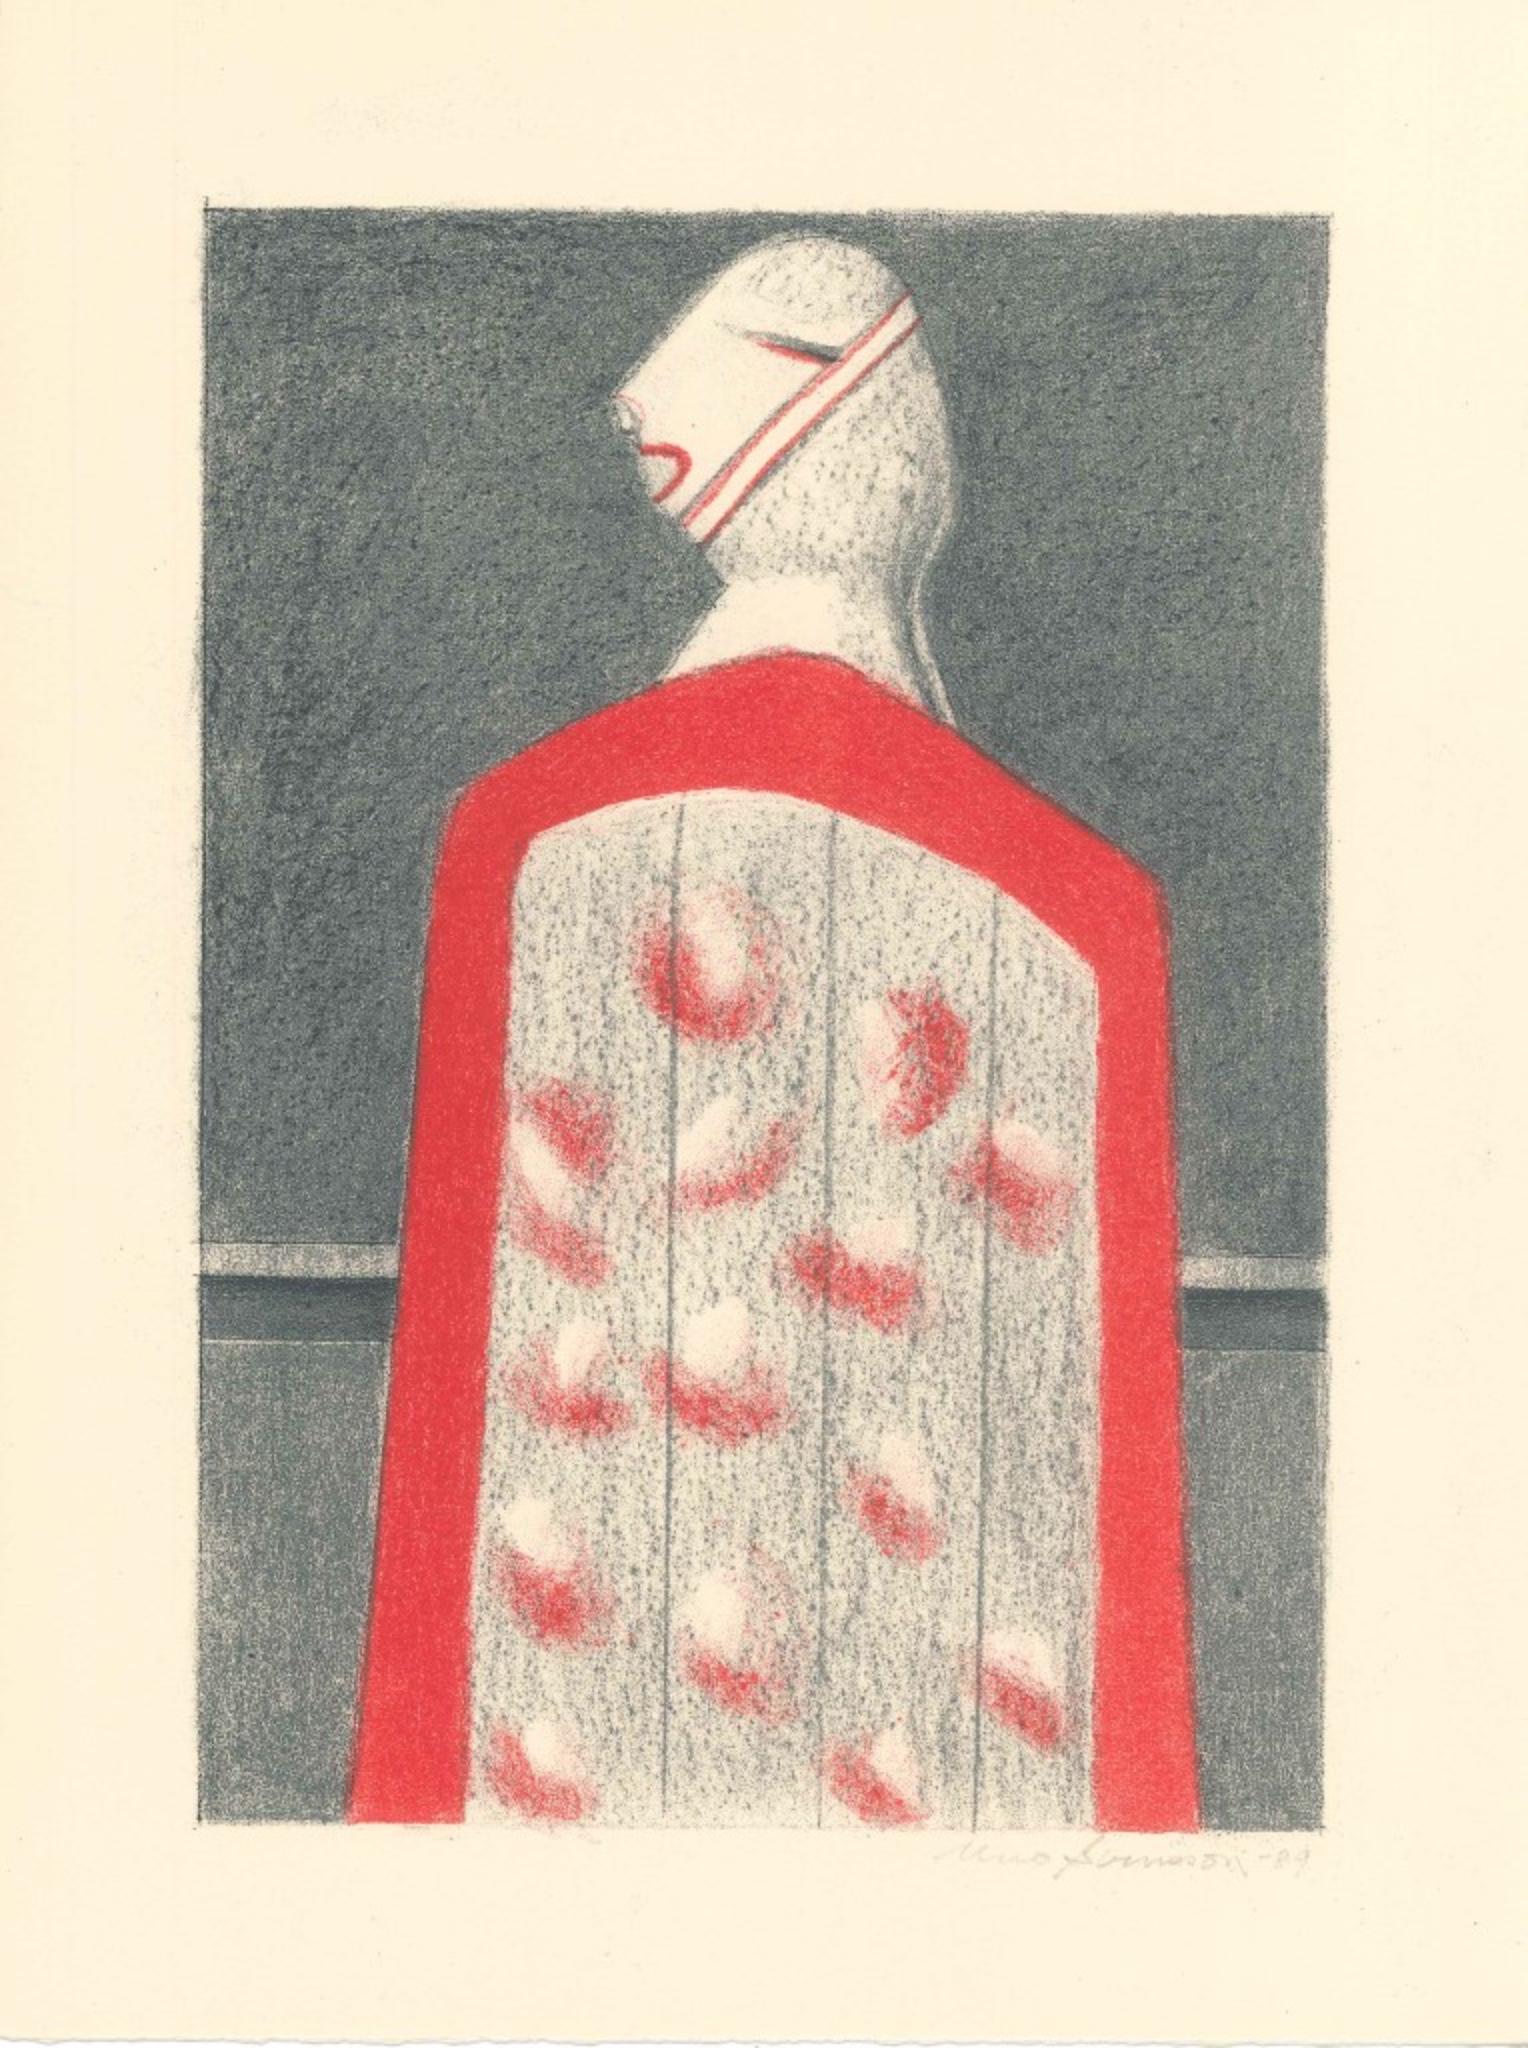 Figure is an original lithograph on ivory-colored cardboard, realized by Alfonso Avanessian in 1989. 

Hand-signed and unnumbered, on the lower right: Avanessian -89.

Very good conditions. 

Alfonso Avanessian (Teheran, 1932 - Rome, 2009) was an